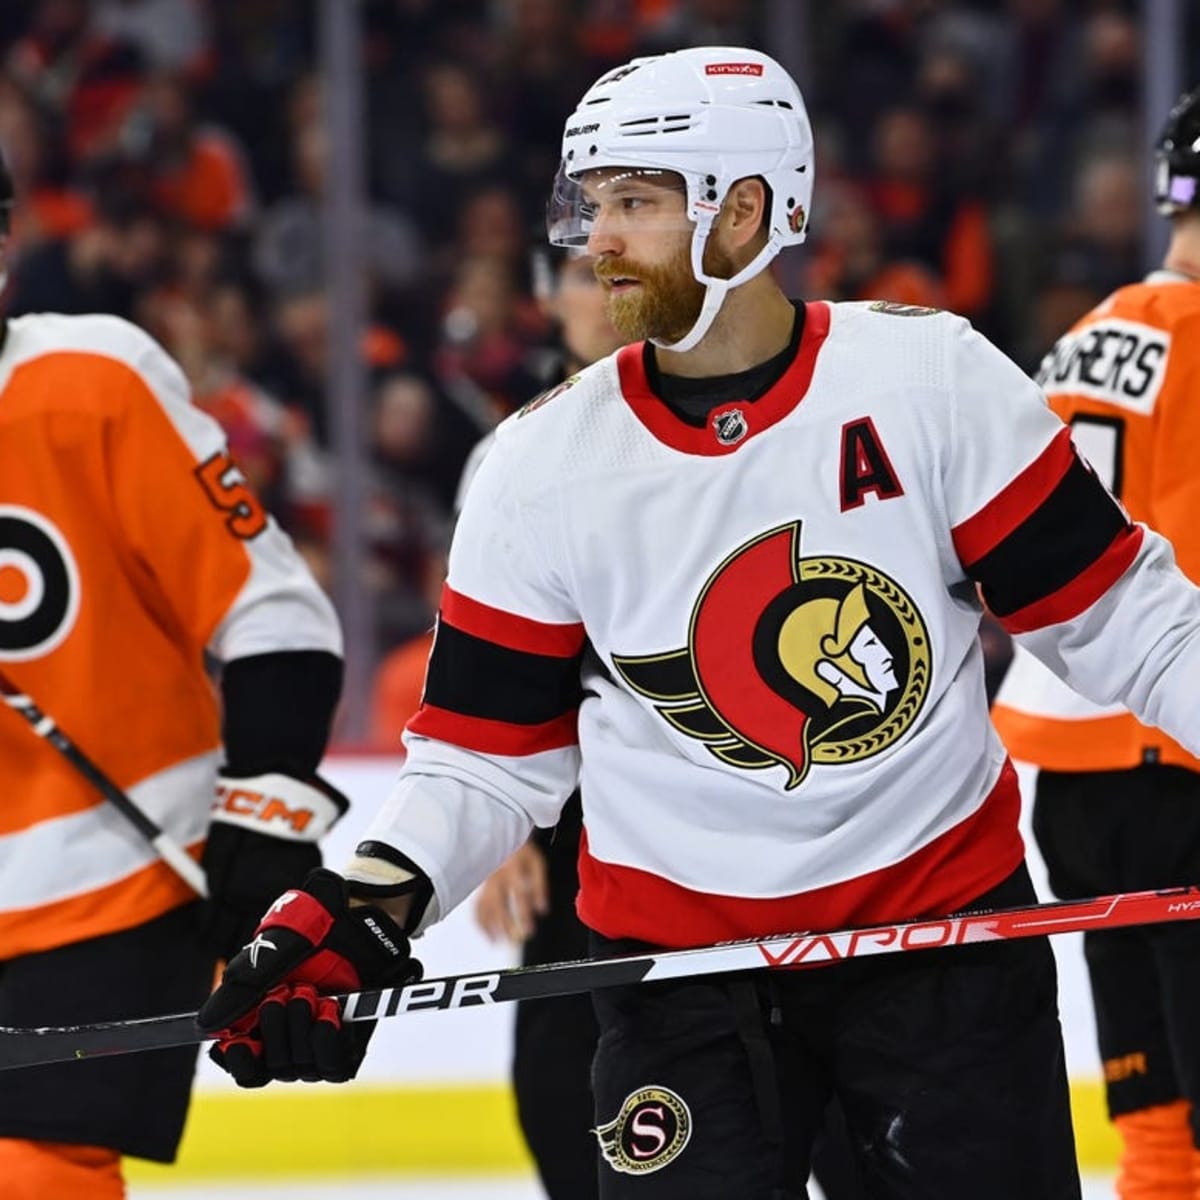 Watch Ottawa Senators vs Pittsburgh Penguins Stream NHL live - How to Watch and Stream Major League and College Sports